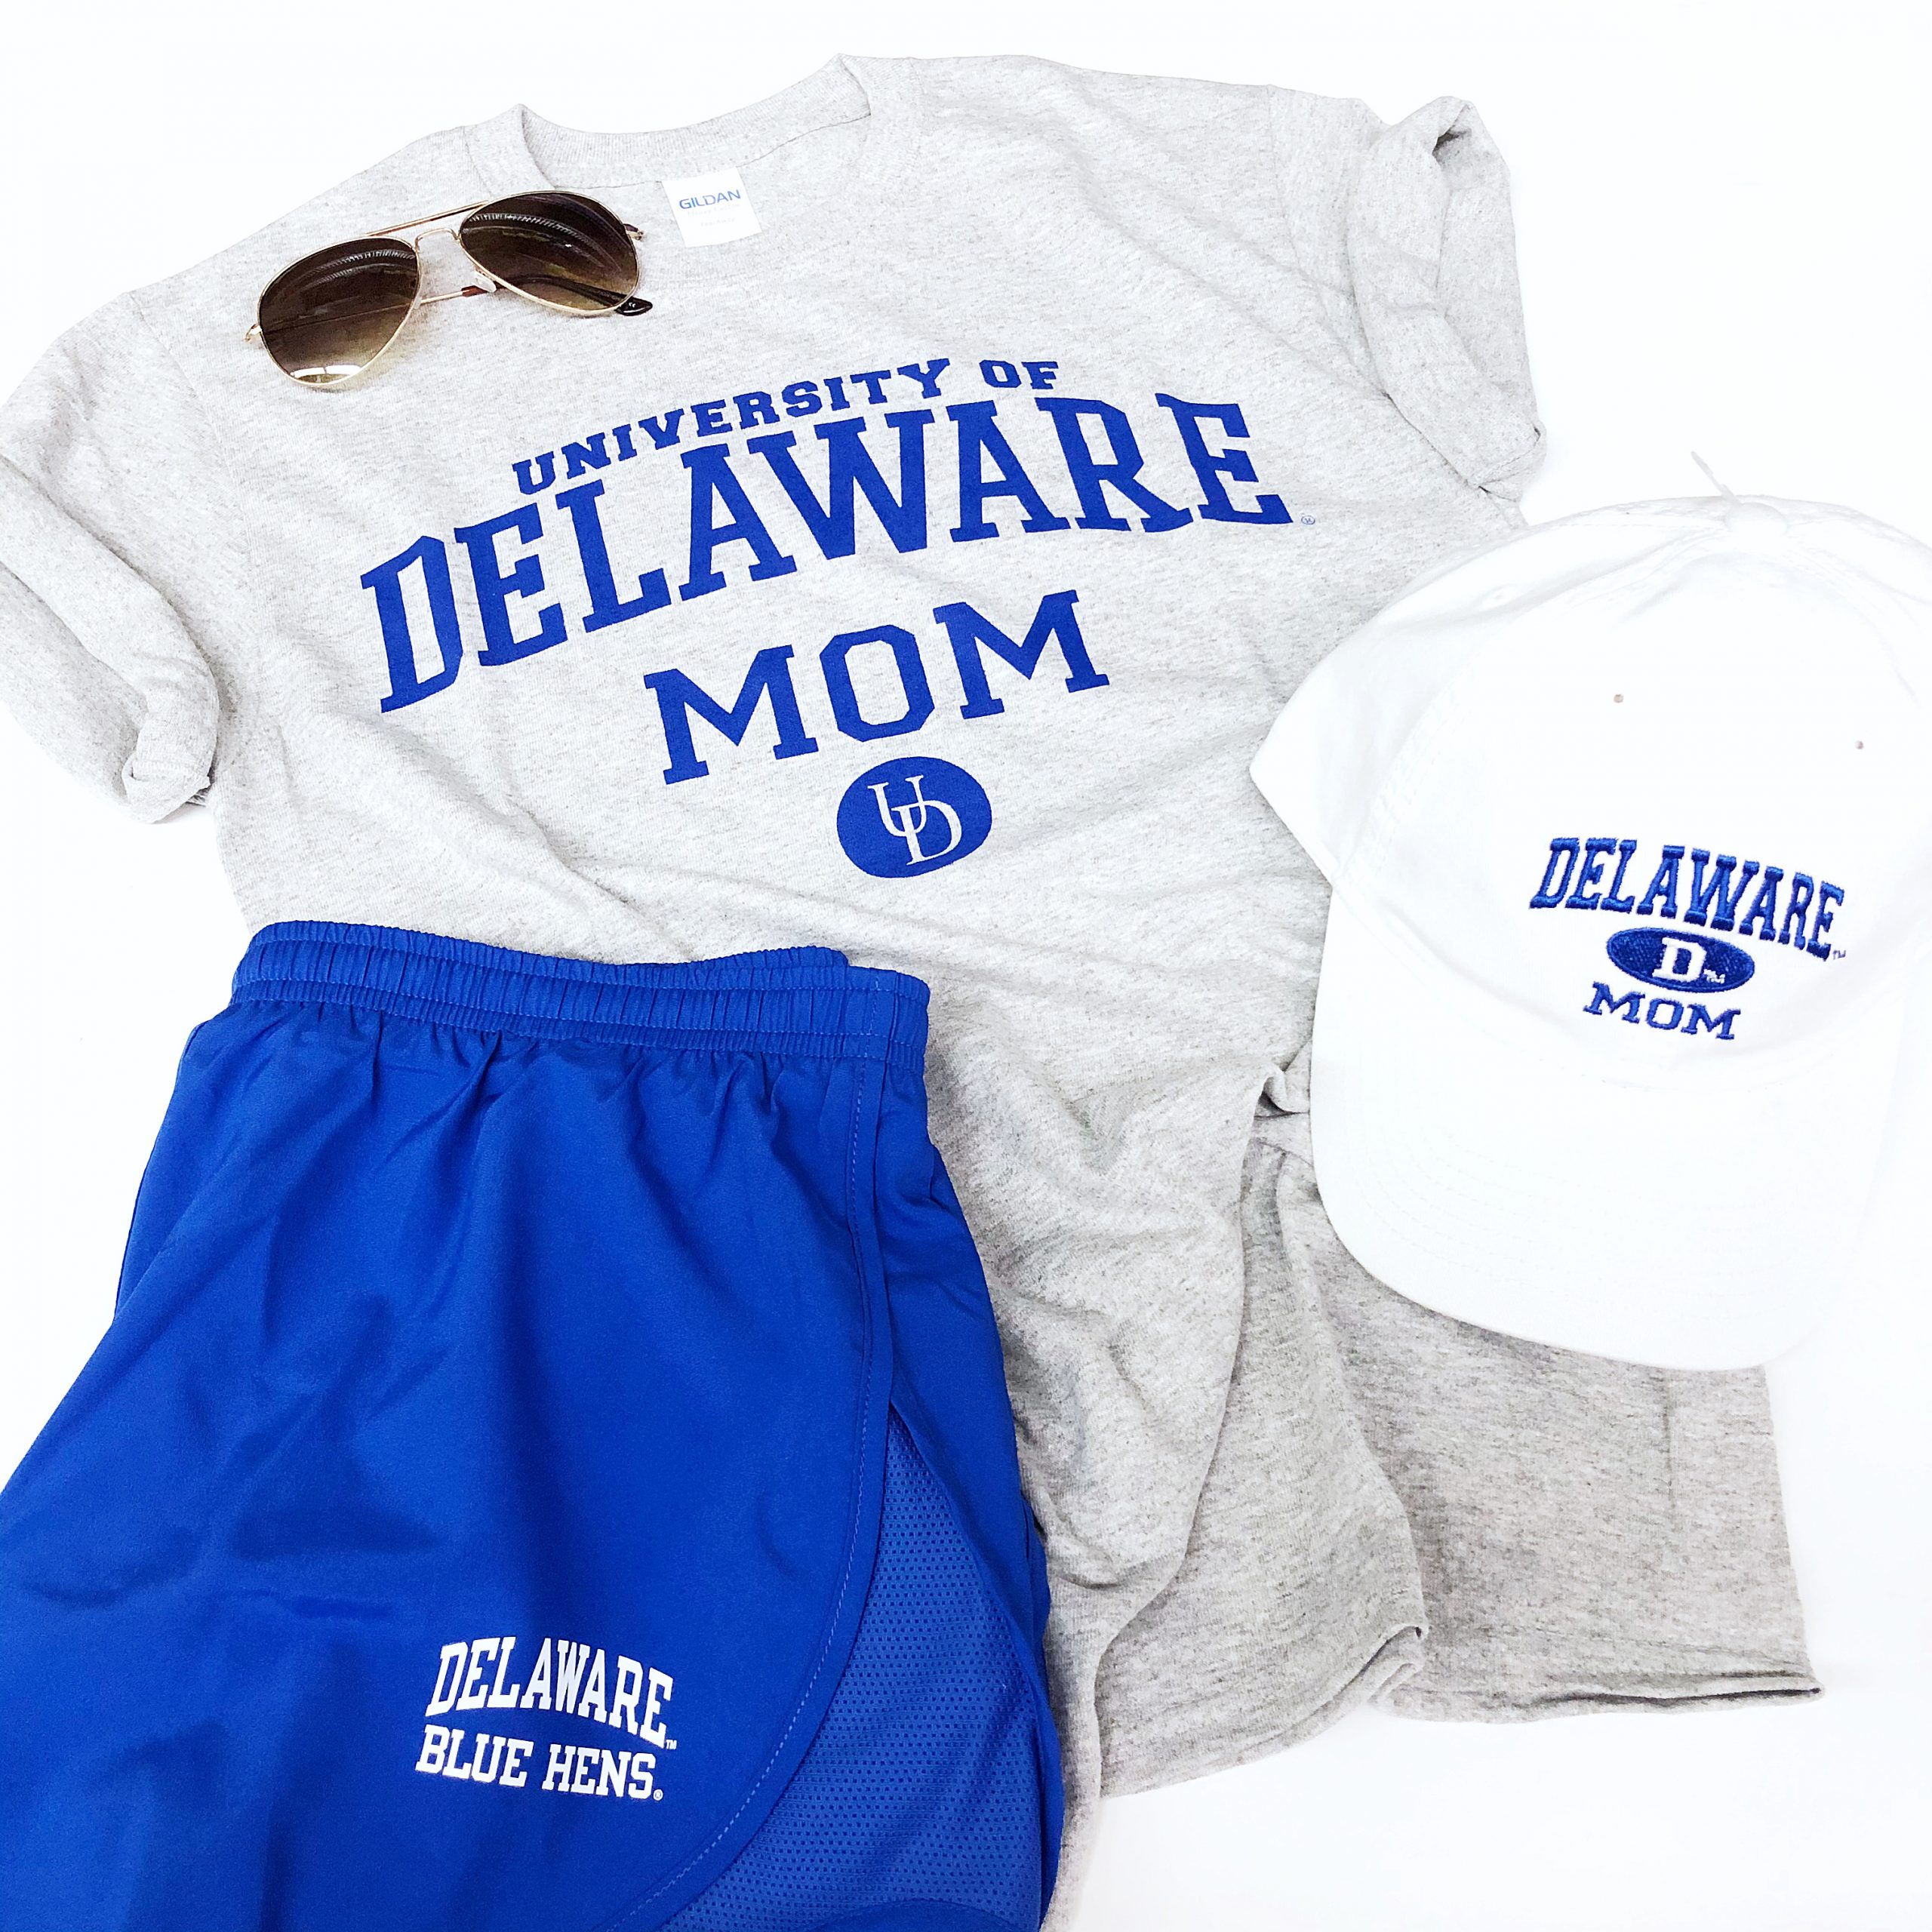 University of Delaware Mom T-shirt – Oxford – National 5 and 10